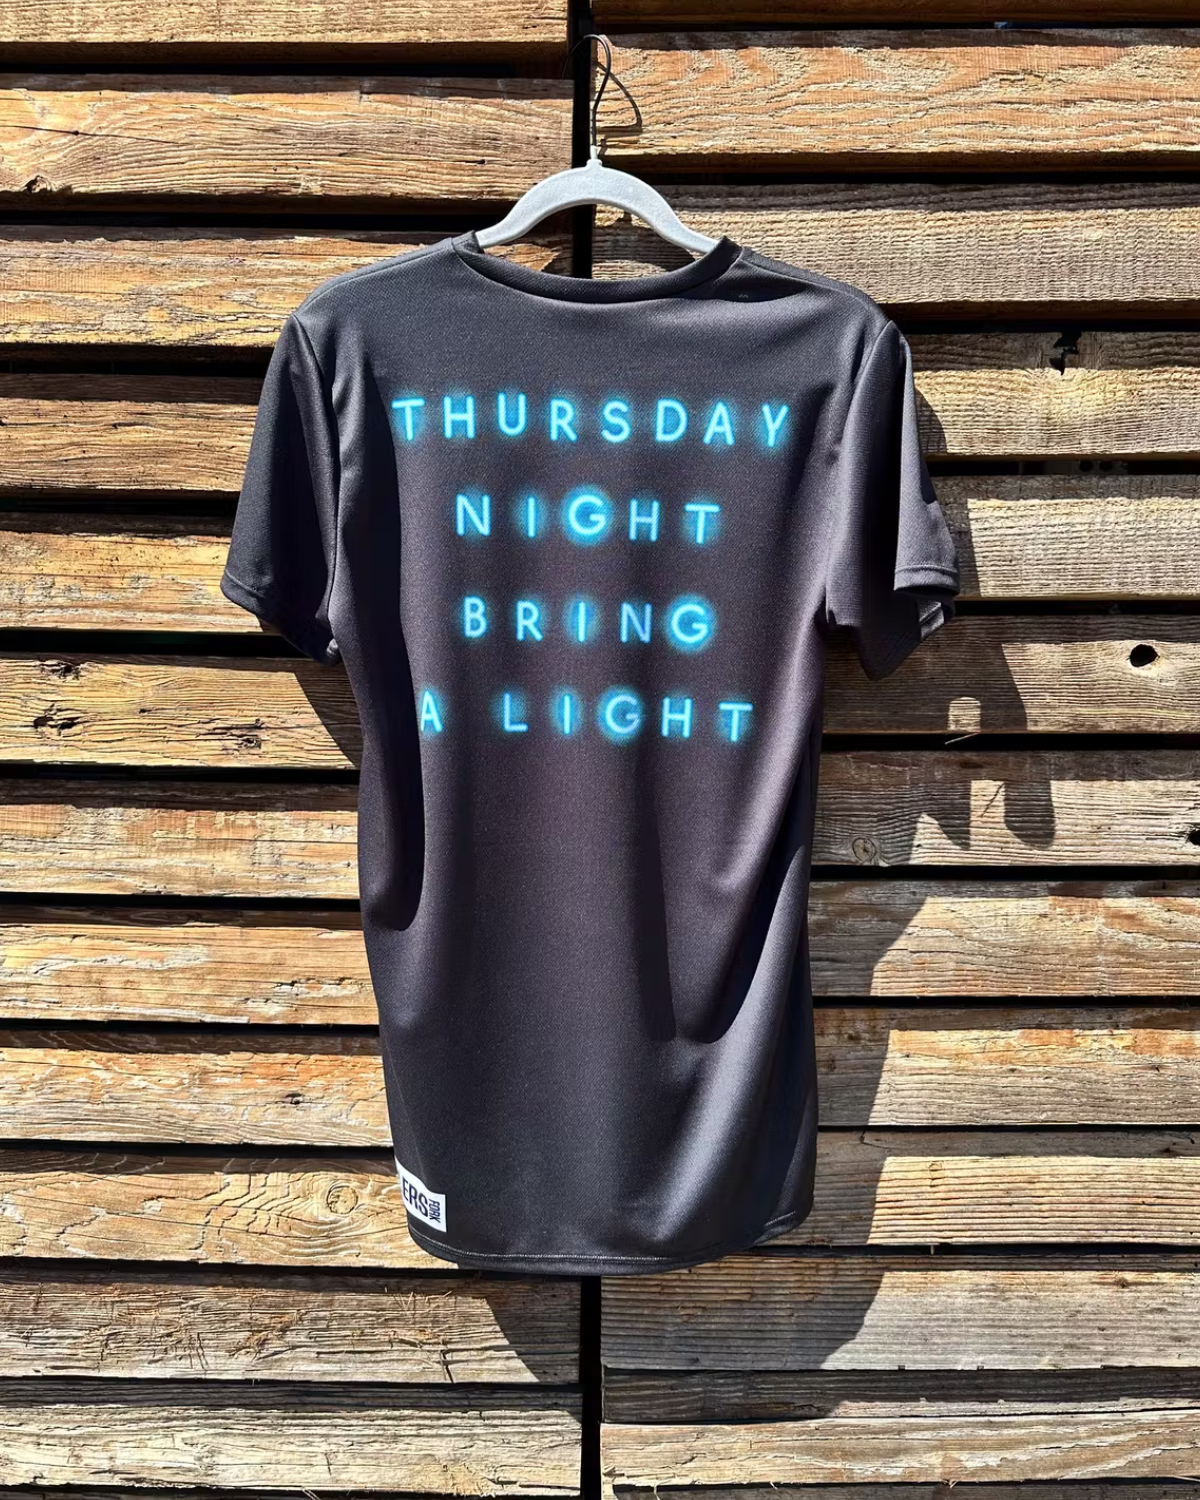 Back of Ride and Pint shirt with text "Thursday Night Bring a Light"